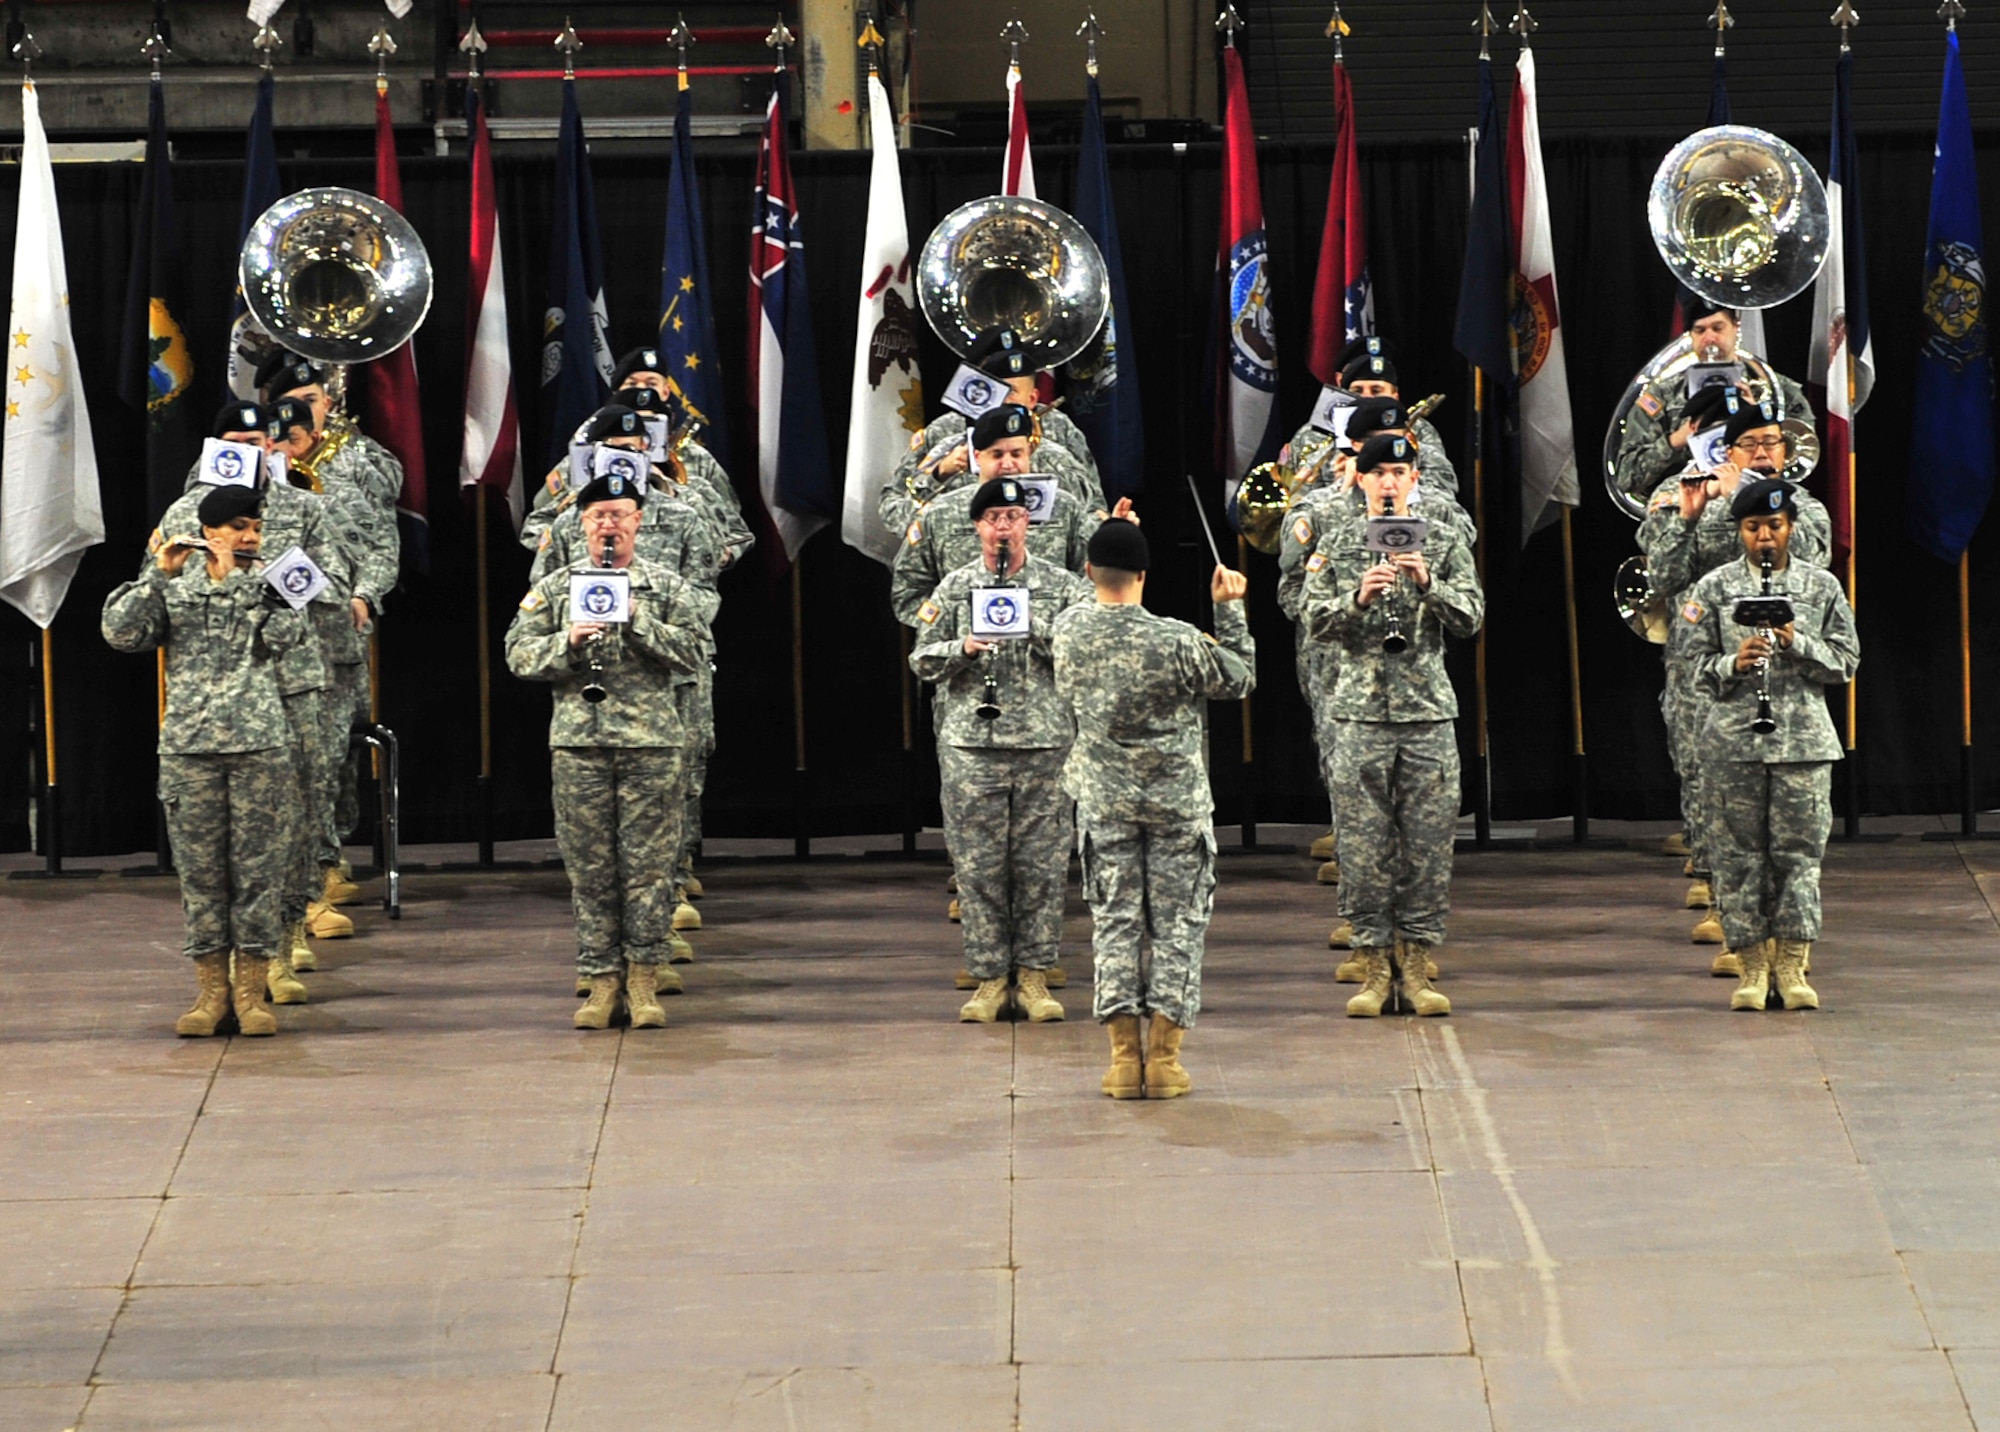 Soldiers of the 9th Army Band perform during the 4th Brigade Combat Team (Airborne), 25th Infantry Division deployment ceremony at Sullivan Arena, Anchorage, Alaska, Nov. 29, 2011. The 4-25 ABCT "Spartan Brigade" will deploy 3,500 Soldiers on a series of flights in November and December en route to Afghanistan. The 9th Army Band is assigned to Fort Wainwright, Alaska. (U.S. Air Force photo/Staff Sgt. Sheila deVera)